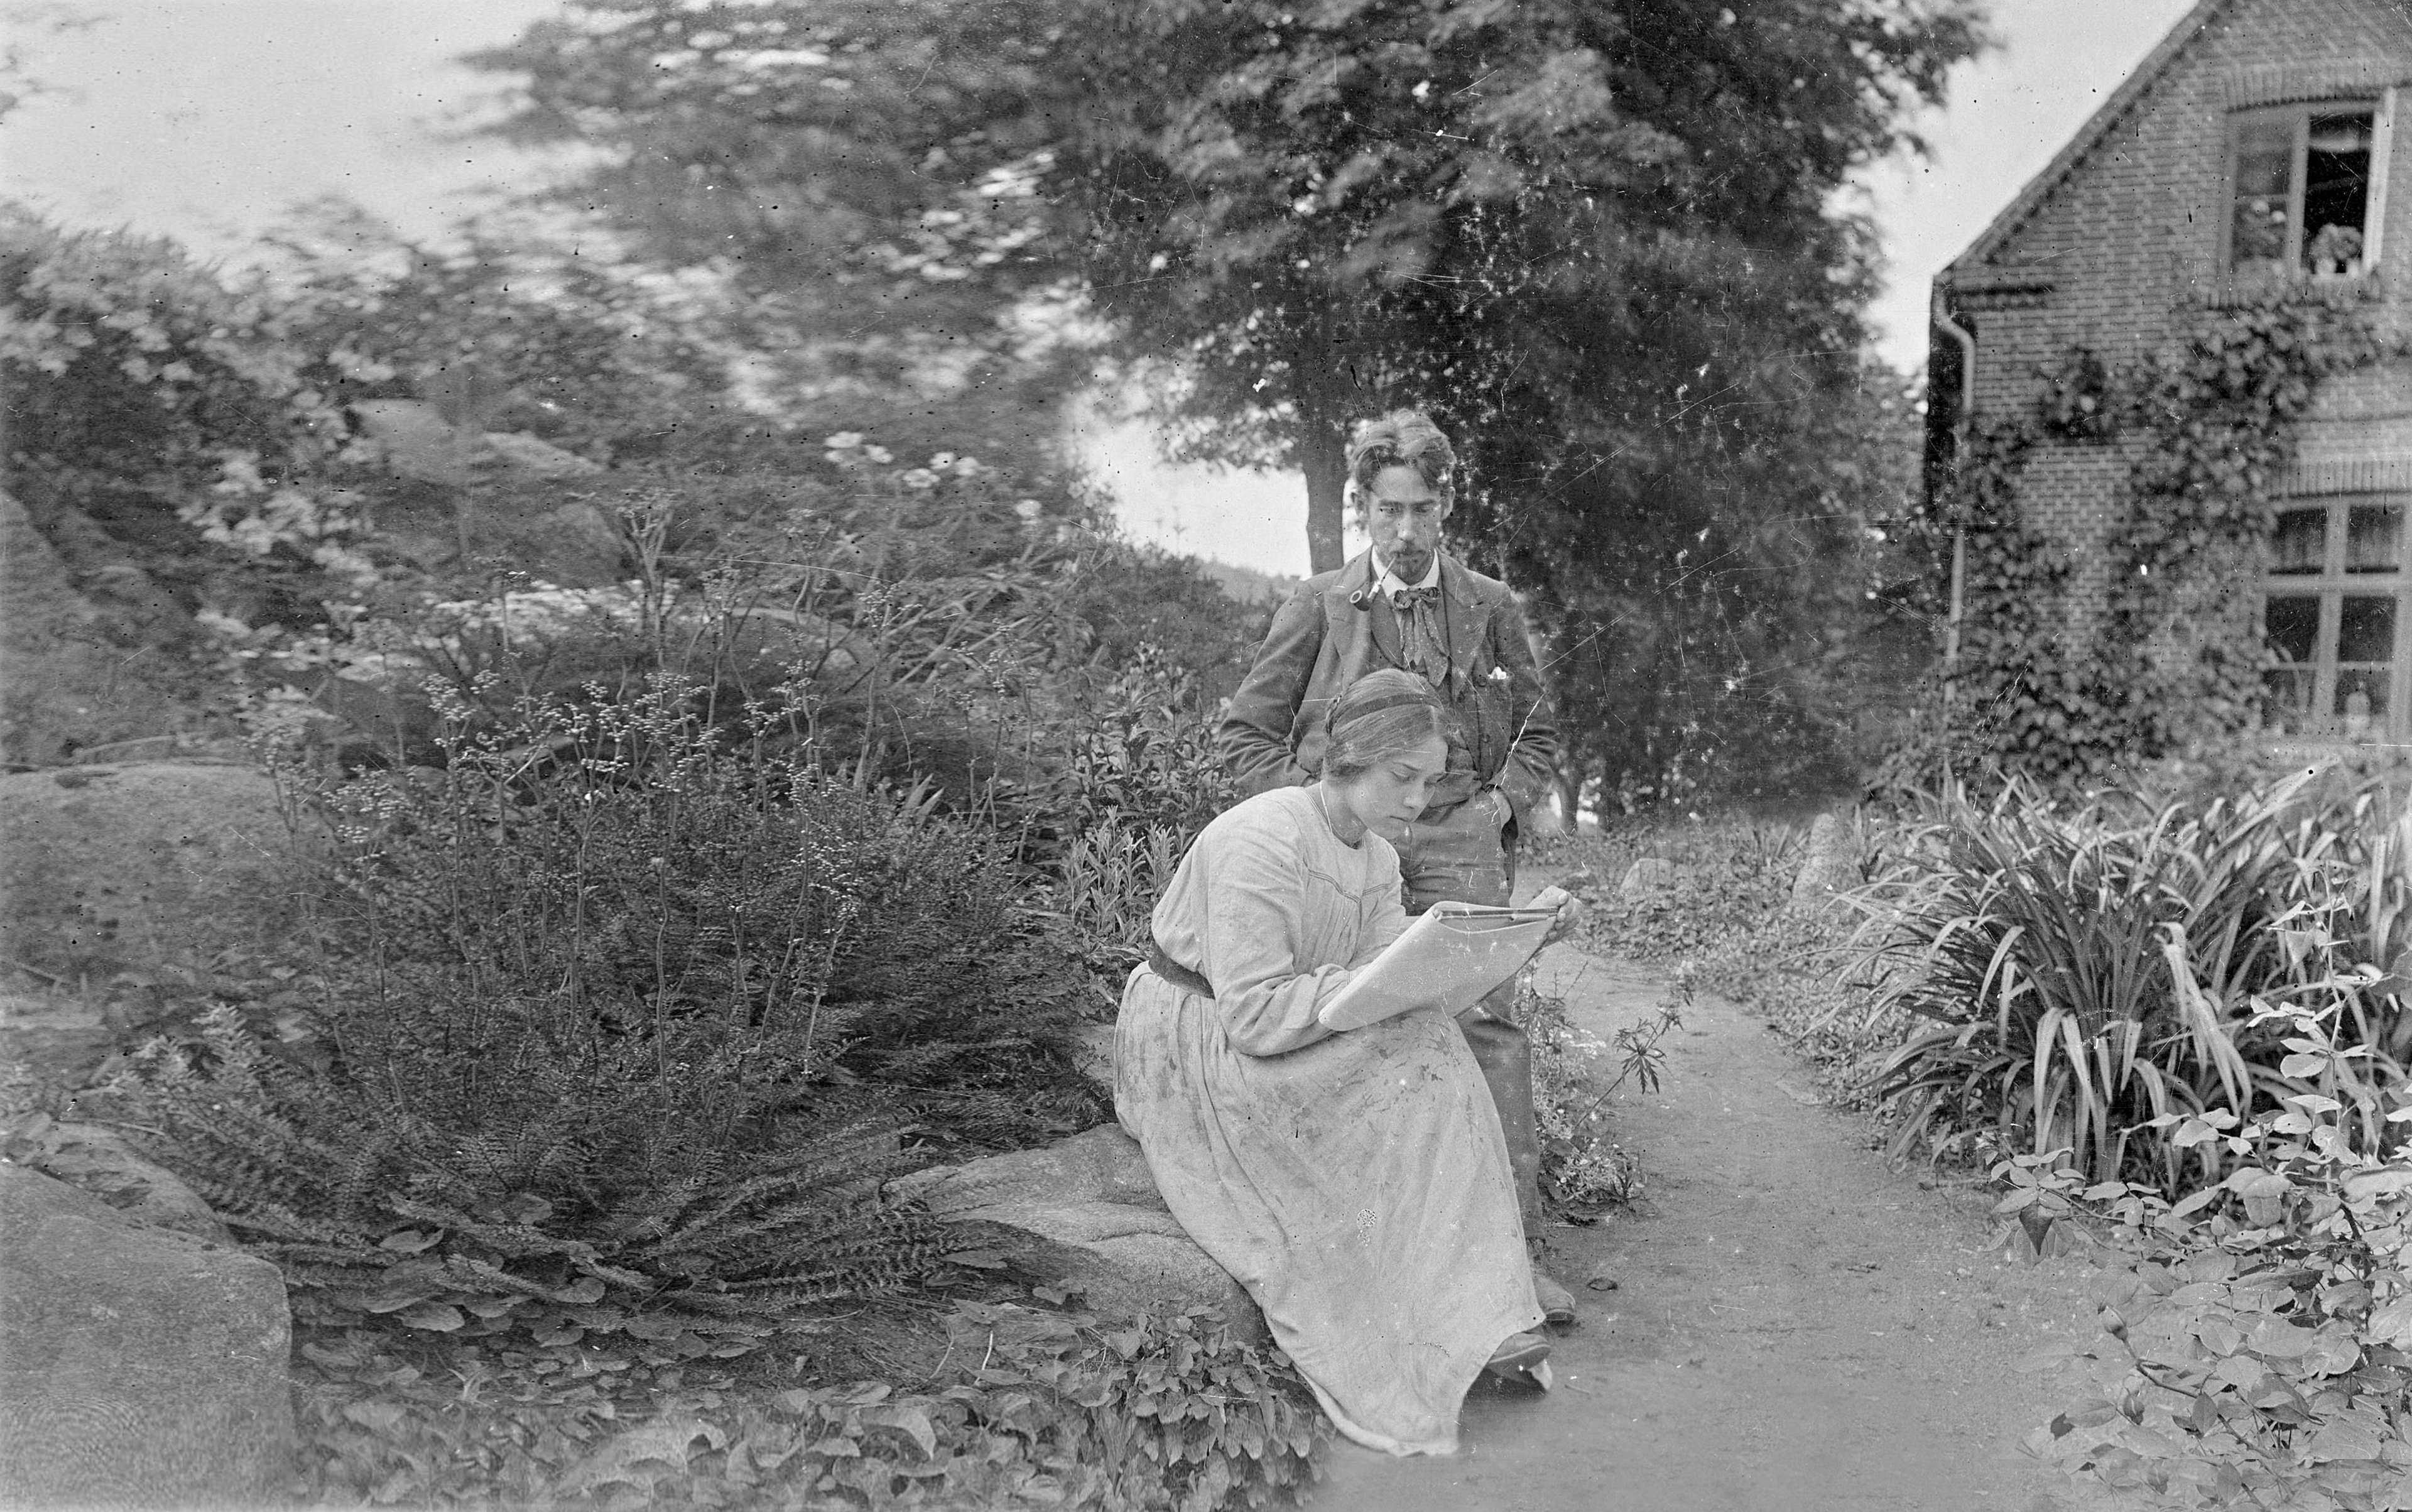 Stella Kähler, a painter at Kähler, reads a book in the garden with her husband, Herman August Kähler